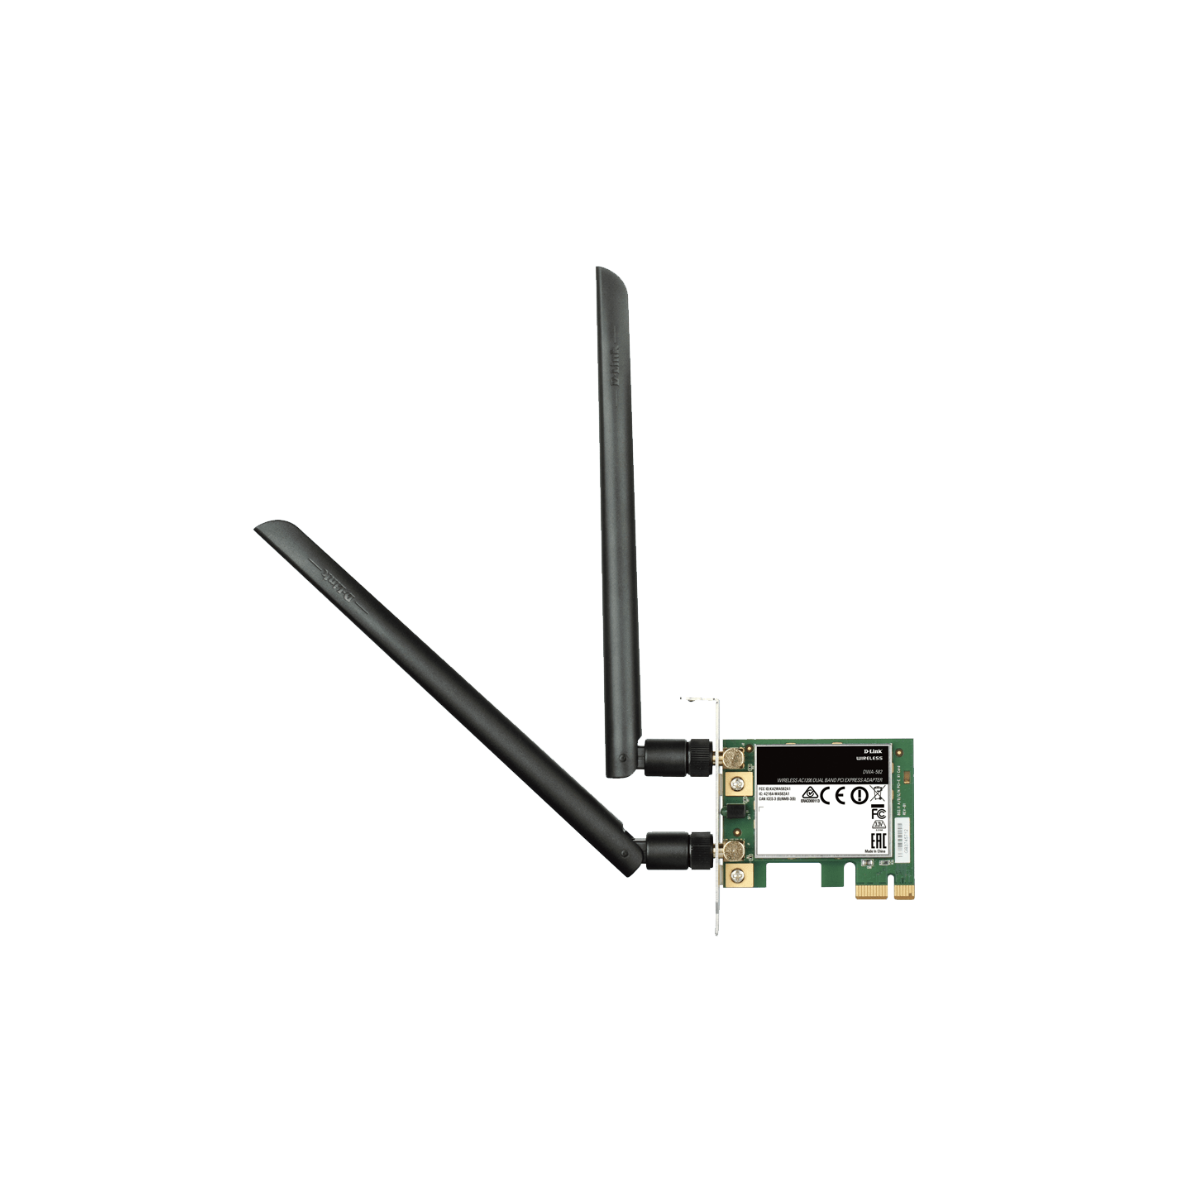 https://www.videoplusfrance.com/478725-product_full/d-link-adapt-pci-express-wifi-ac1200-dual-radio-antenne-ext-haut-gain.jpg